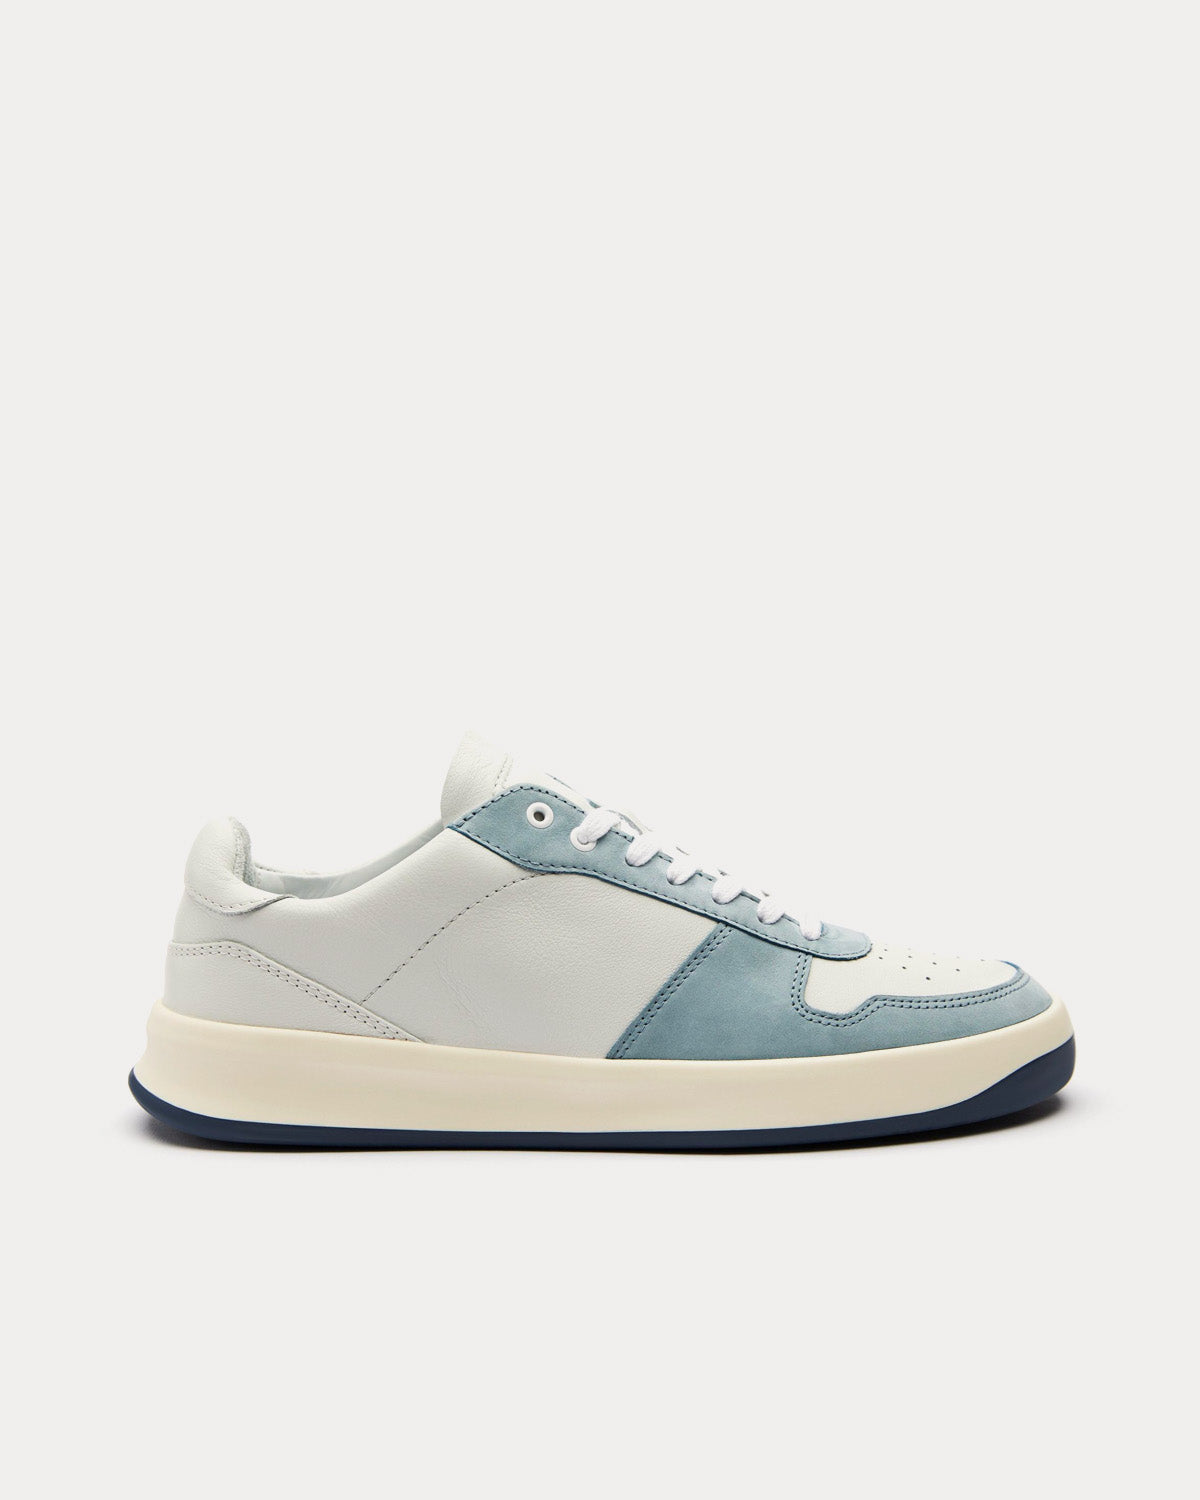 Vor - 5A MIAMIBLAU Blue / Off-White Low Top Sneakers